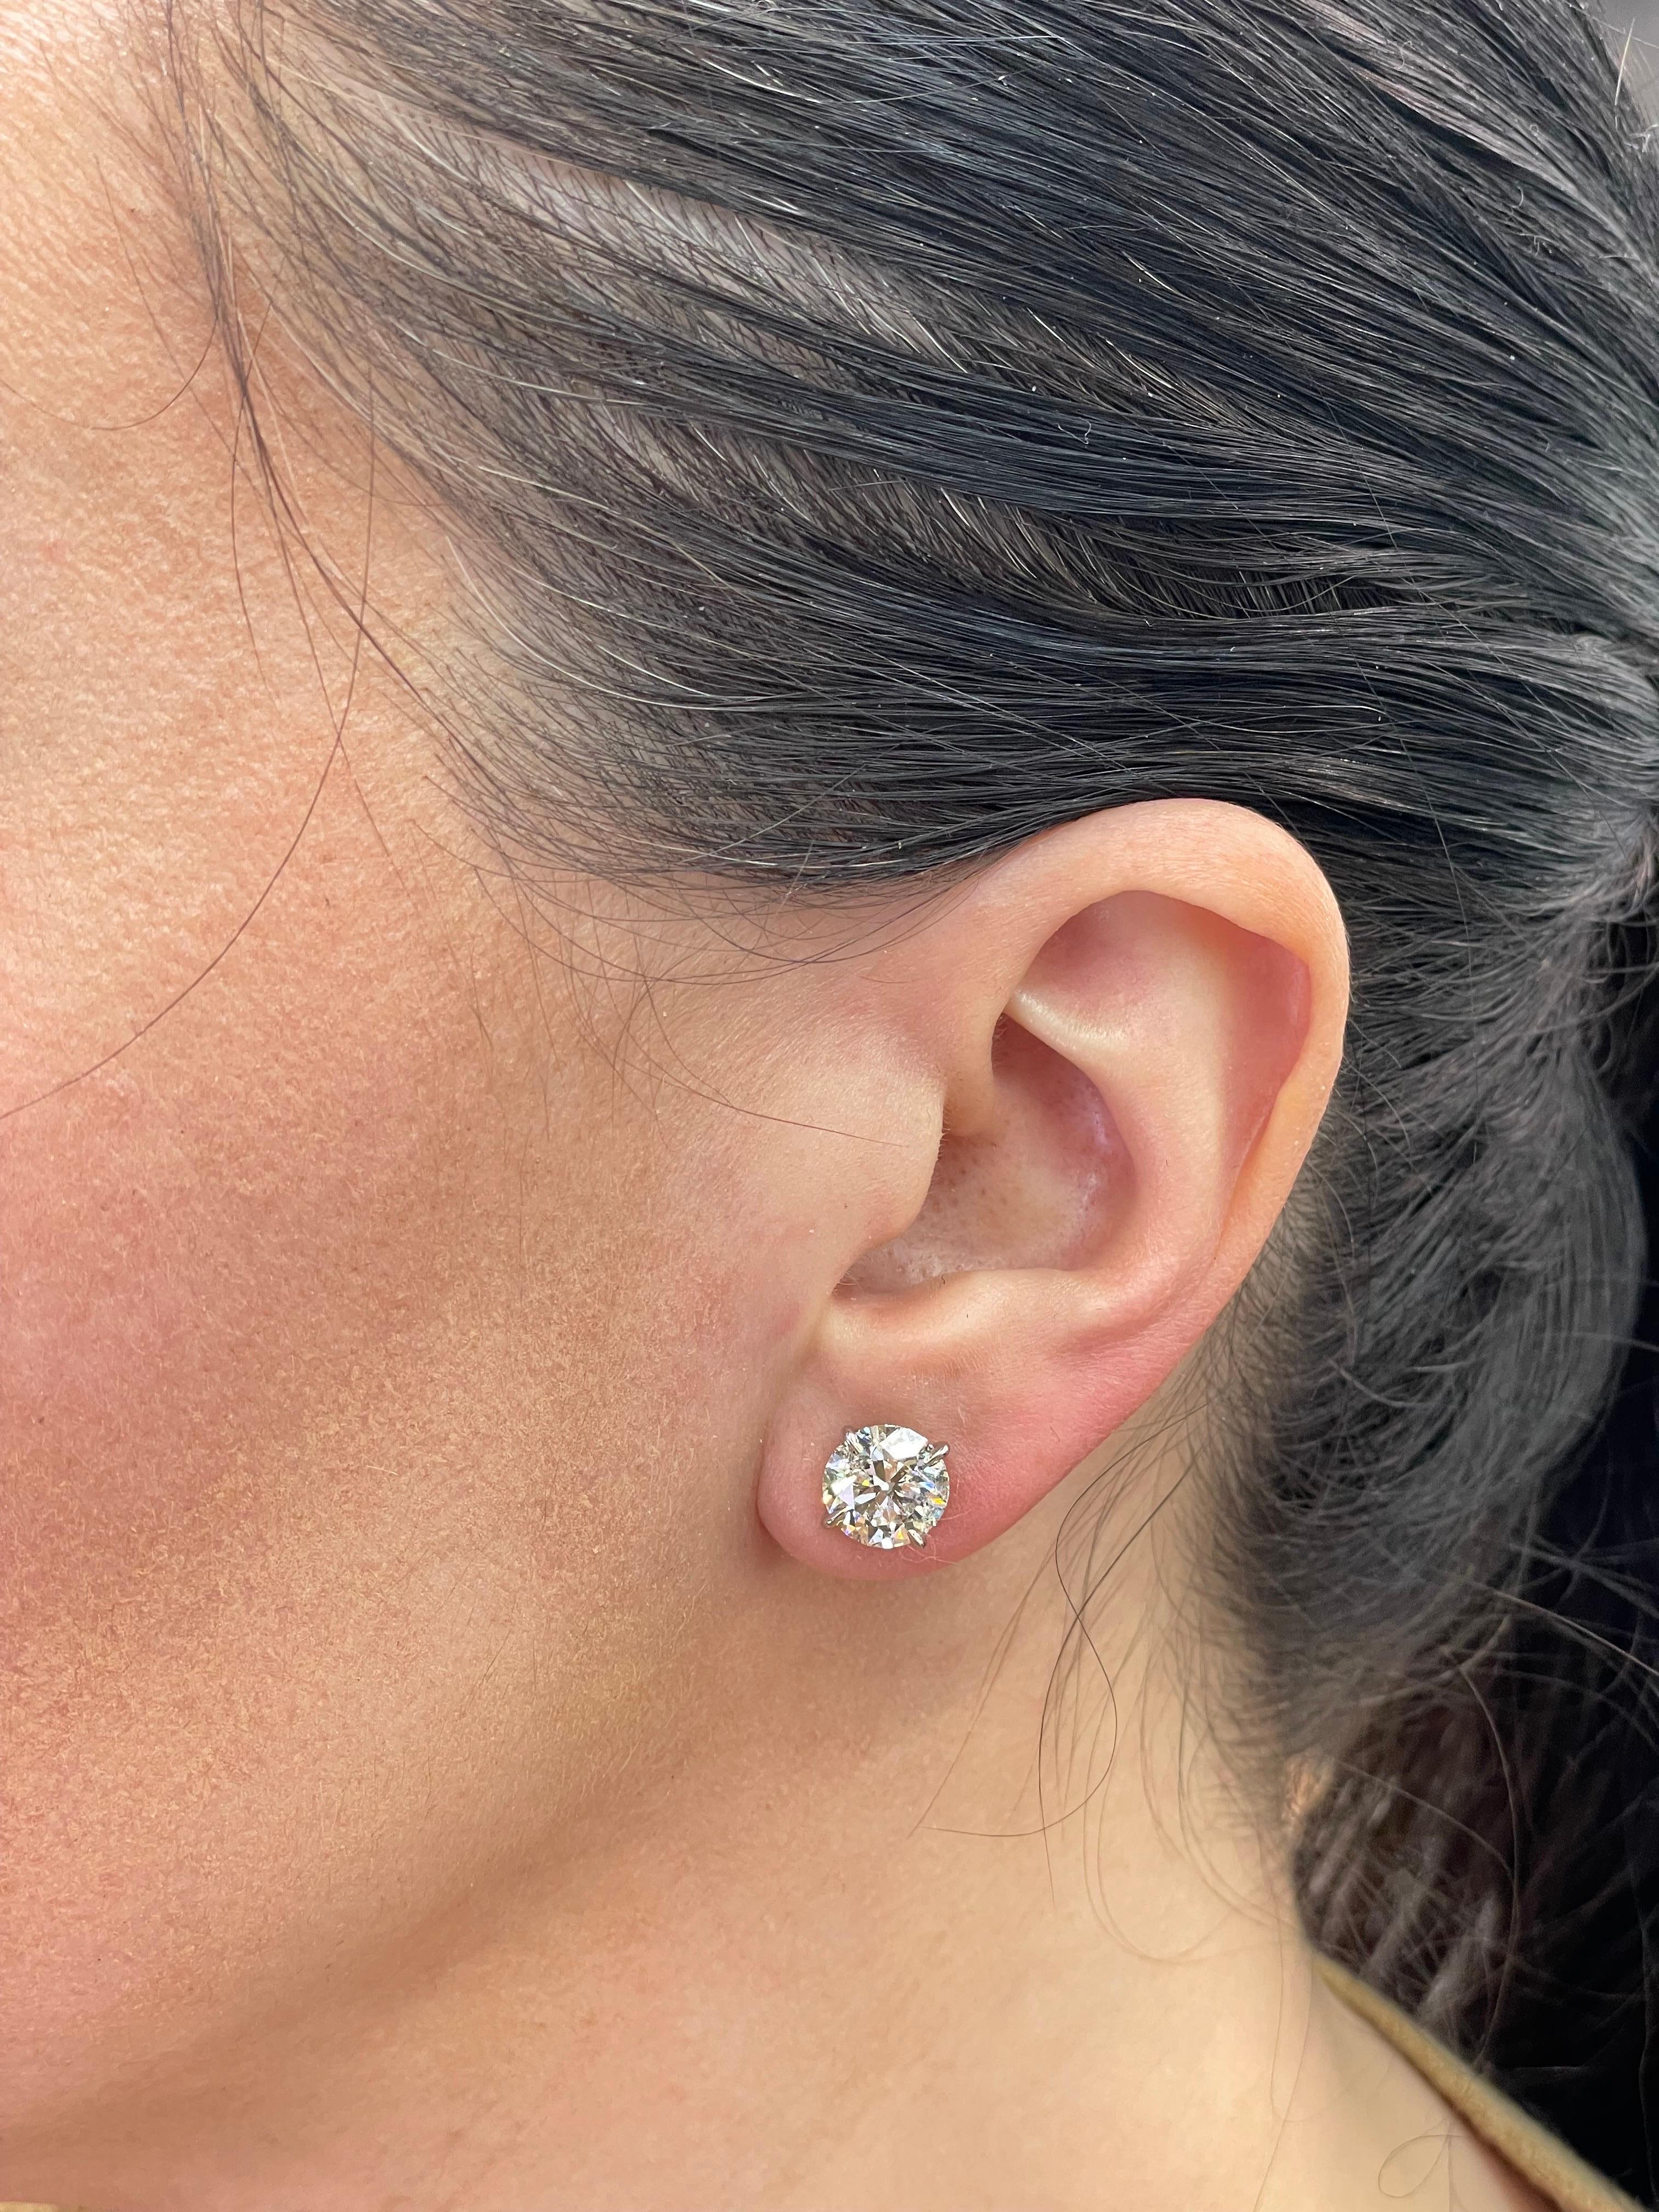 Diamond stud earrings weighing 6.12 Carats in a 4 prong Champagne setting crafted in Palladium.
Color L
Clarity I1 
Full of Life & Clean to the Eye, Nice Shine!
Call/Message us to discuss more in detail.

Setting can be changed to a Basket, Martini